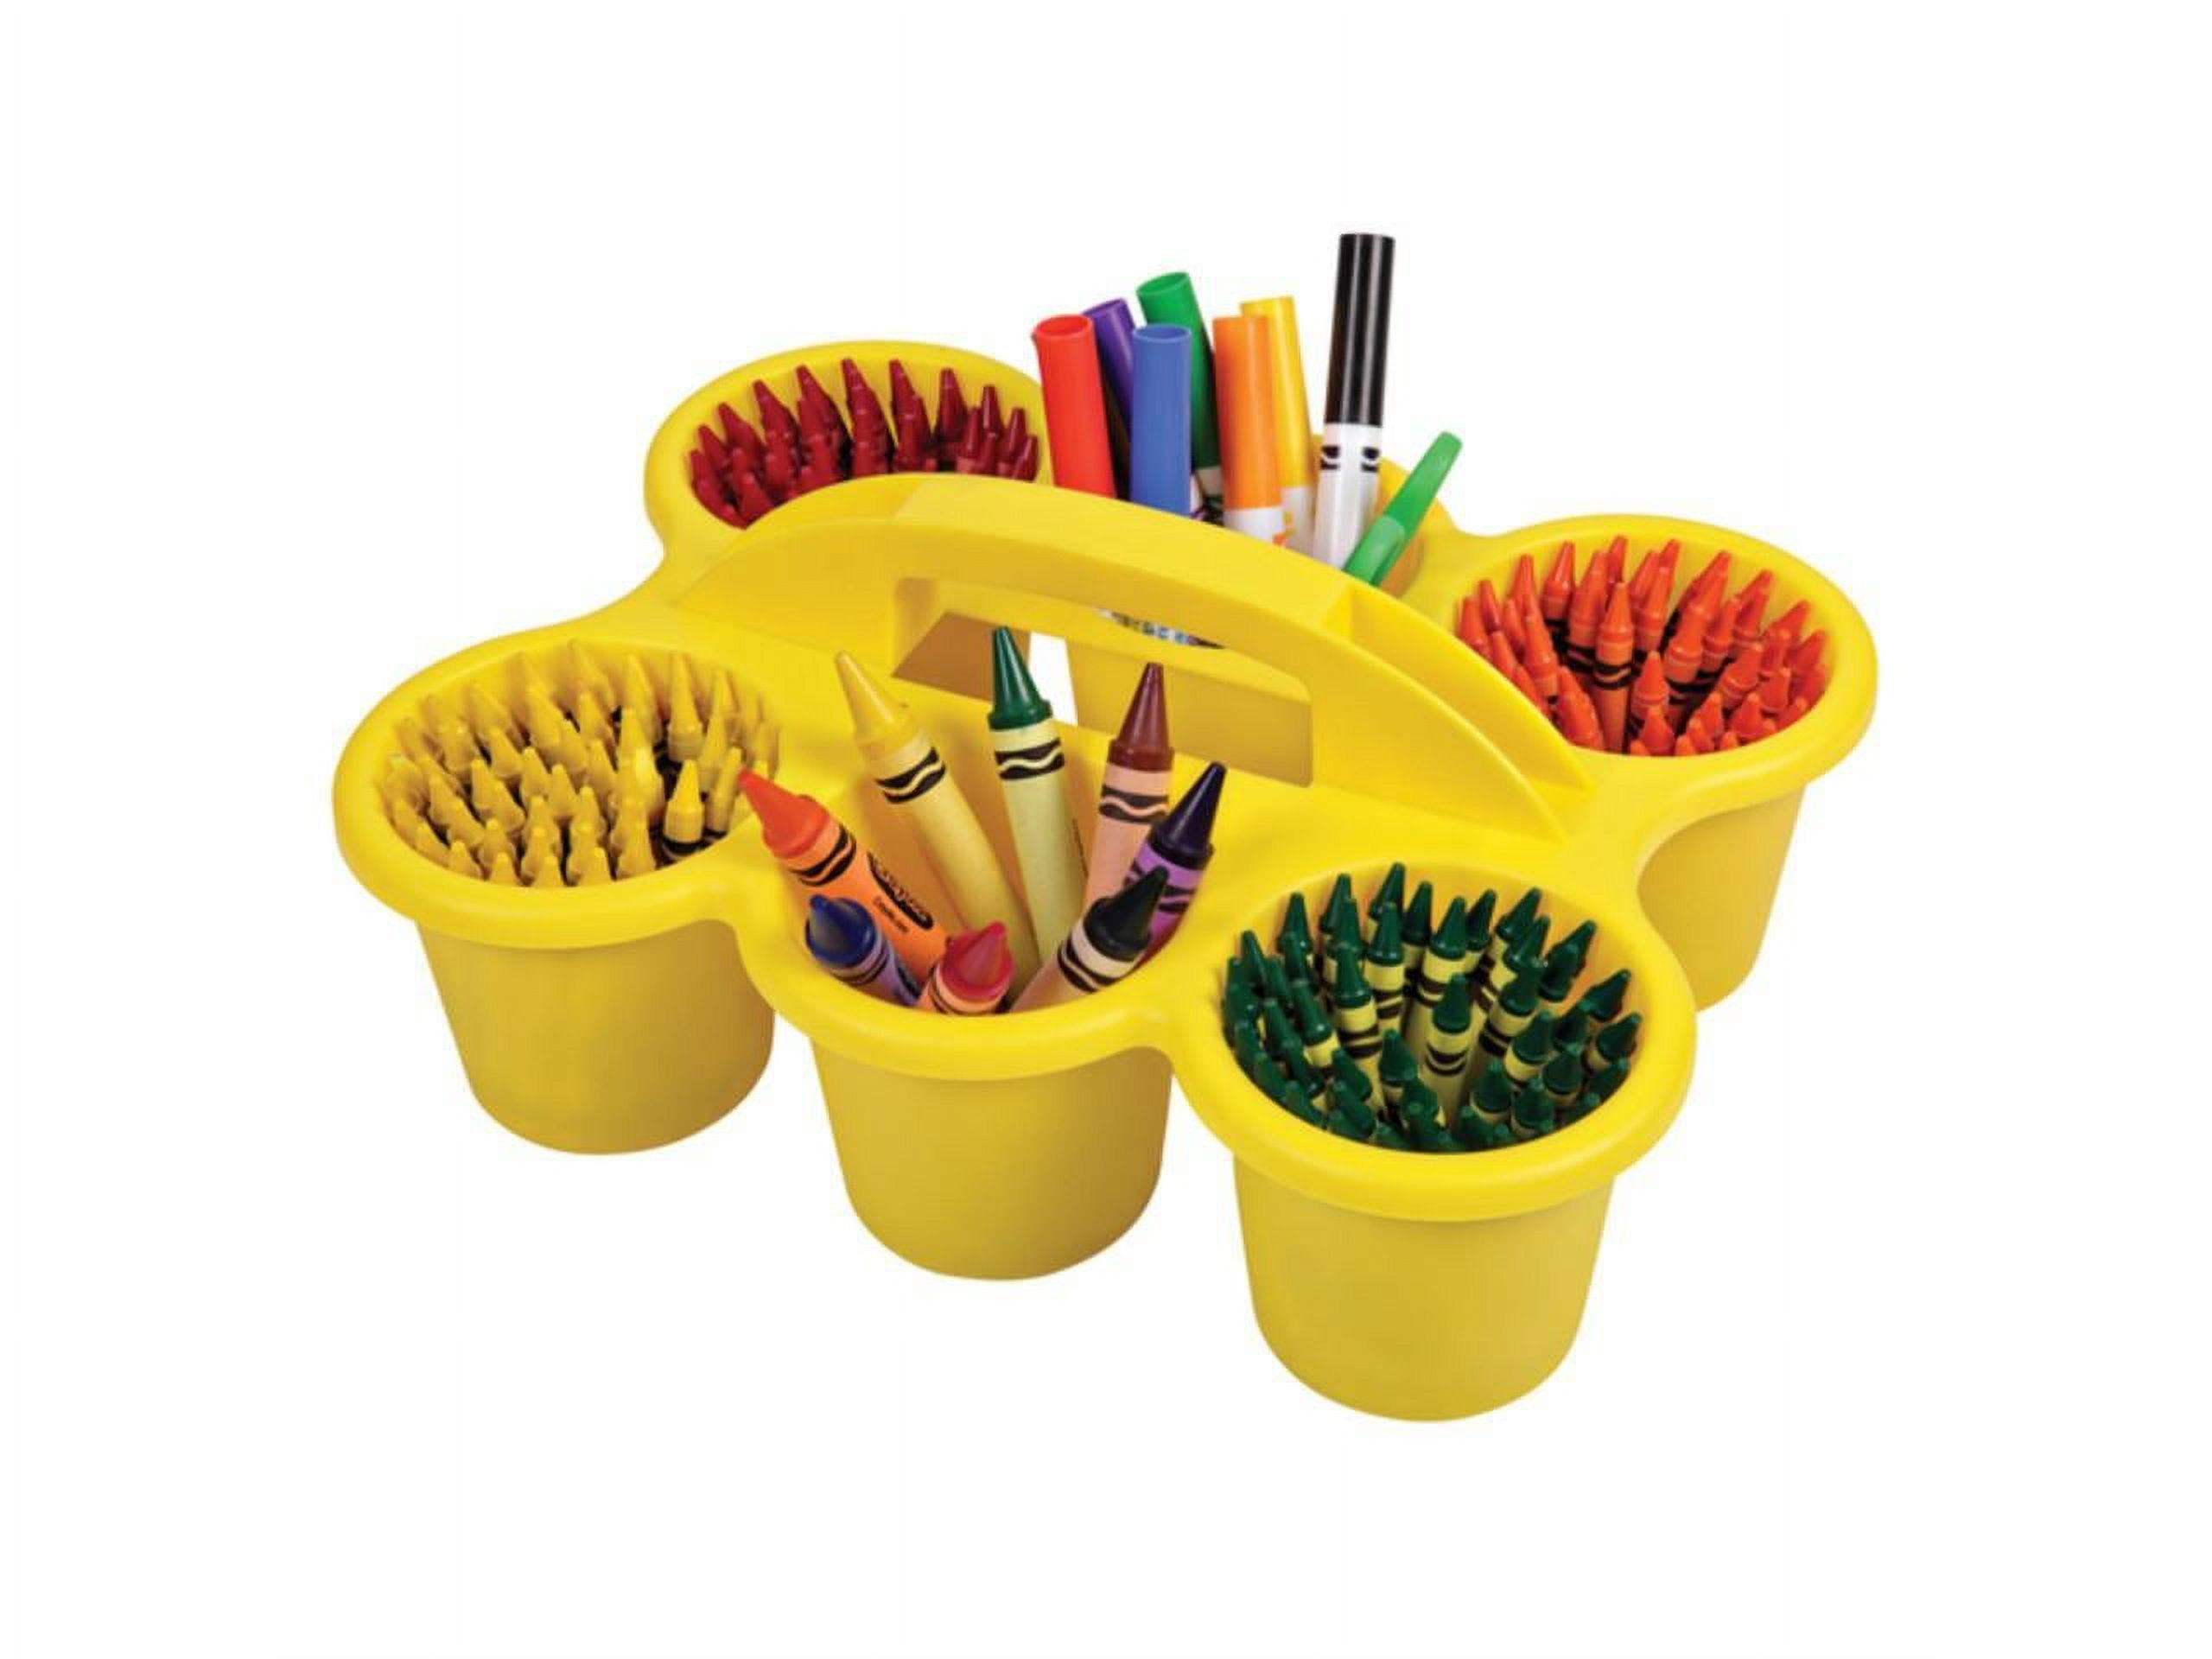 Deluxe Small Classroom Caddy, Orange Set of 6